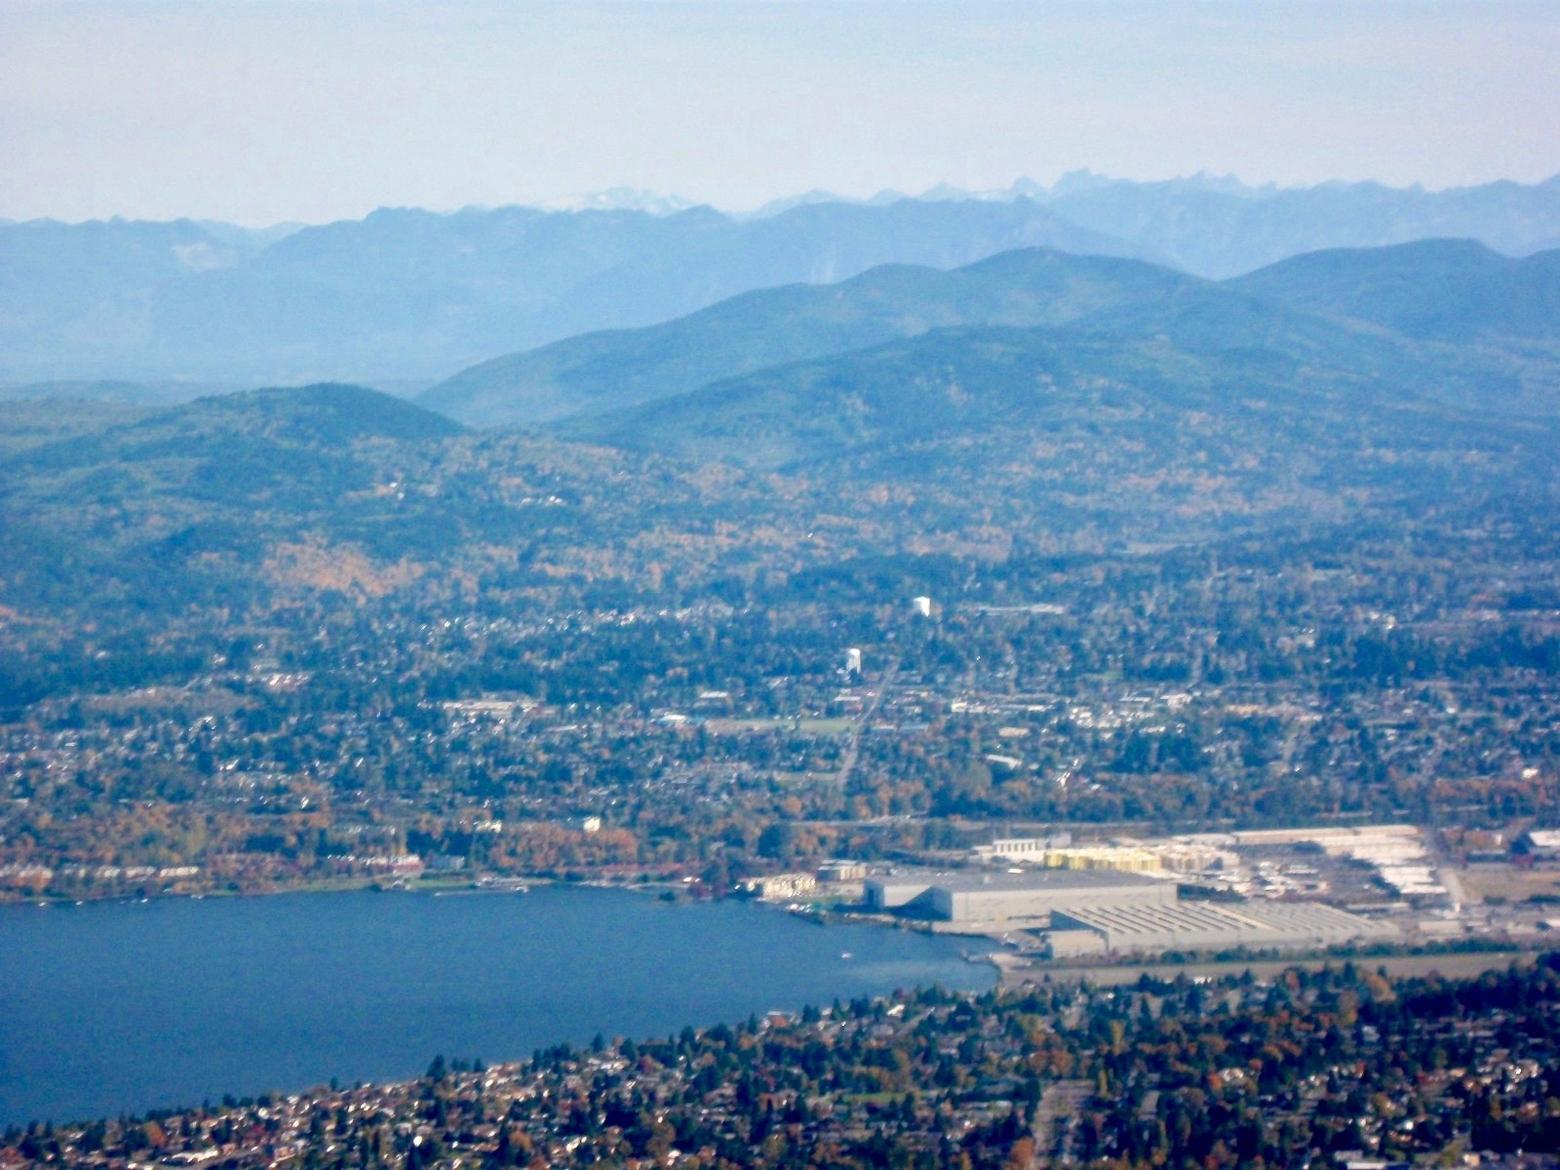 Seattle overlooking the south end of Lake Washington and Cascades in distance. Susan Marsh's essays in MoJo always invite us to ponder bigger, more important questions about place. Here's one: In Greater Yellowstone's two largest booming areas—Jackson/Teton counties (Wyoming and Idaho) and Bozeman/Gallatin County, planners and local land developers often blindly reference Seattle and Portland and often with the lament, "if only we could be like them?" They do so, without reflecting on what  those metro areas have given up, lost or had destroyed by growth in terms of their interface with nature. Back in Greater Yellowstone, especially around Bozeman/Gallatin County, there is no unified plan or vision being led by elected officials to protect surrounding wildlands and habitat from the effects of sprawl. This, as the negative aesthetic impacts and financial costs of growth continue to escalate and the latter burden is being placed on taxpayers. If you emulate Seattle and Portland, and do not craft a vision that reflects your own values, does that mean you are then fated to resemble those places? Moreover, if you are a newcomer fleeing such metro areas, then why would you support similar approaches to growth? Photo courtesy coetzee/ Wikimedia Commons